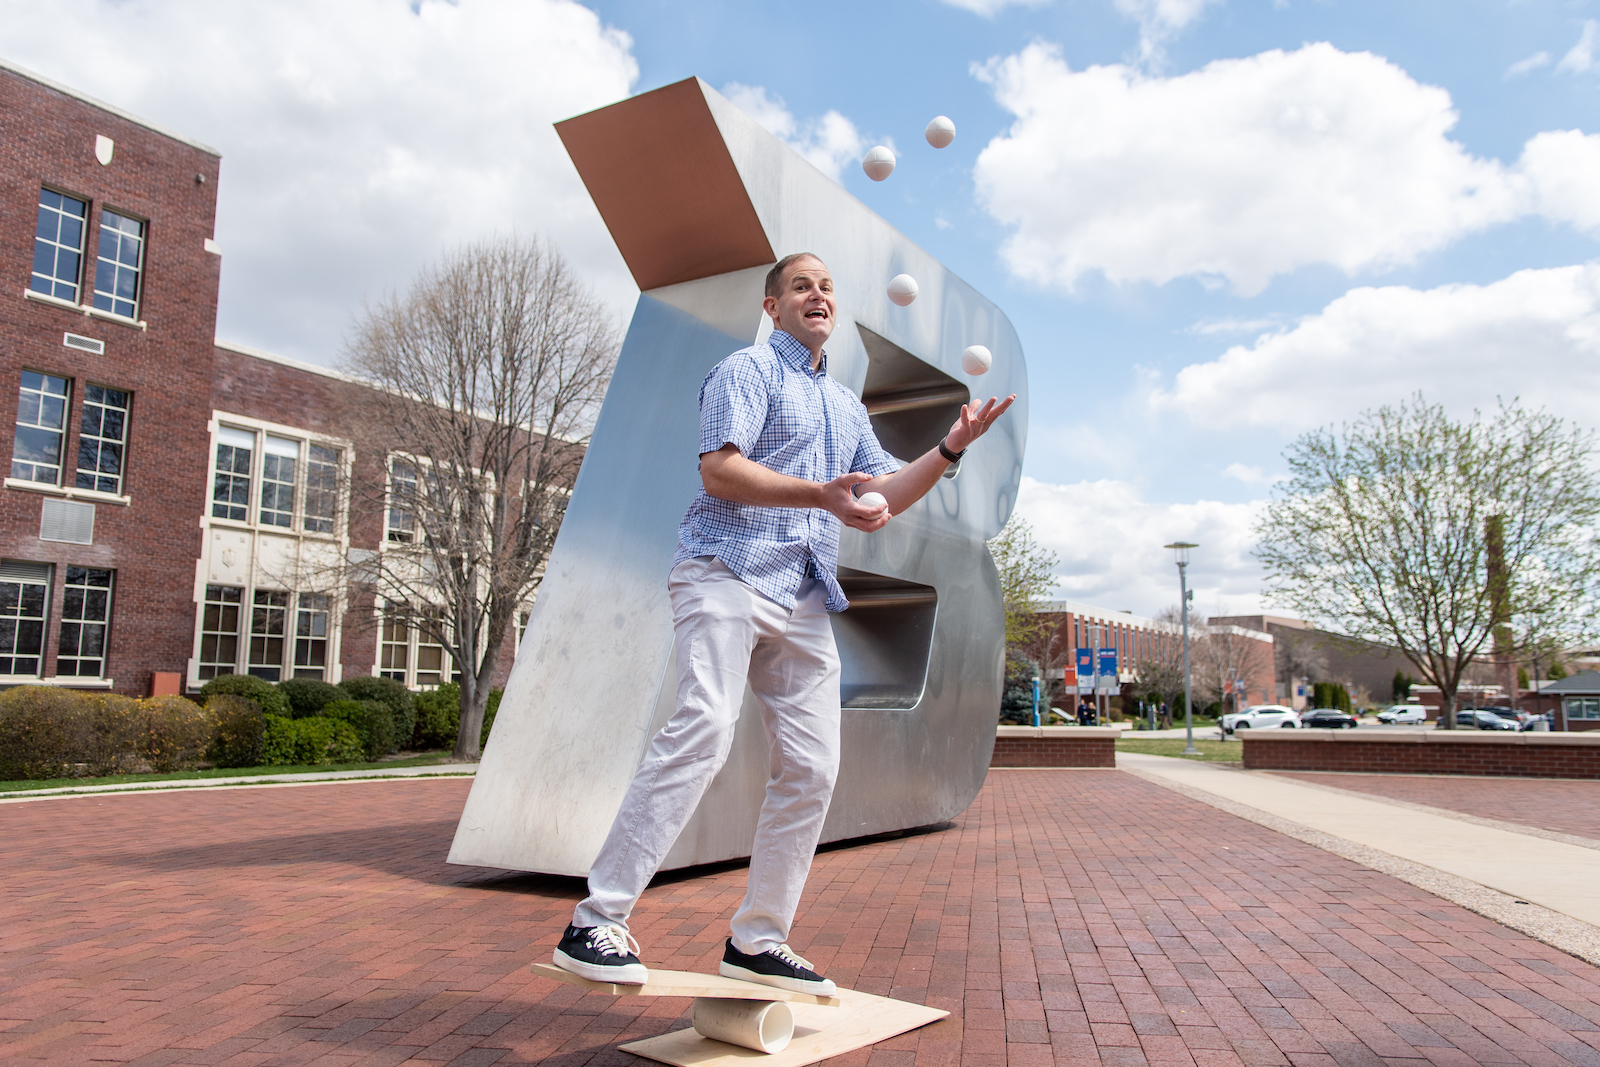 man juggles three balls in front of 'B' statue on campus